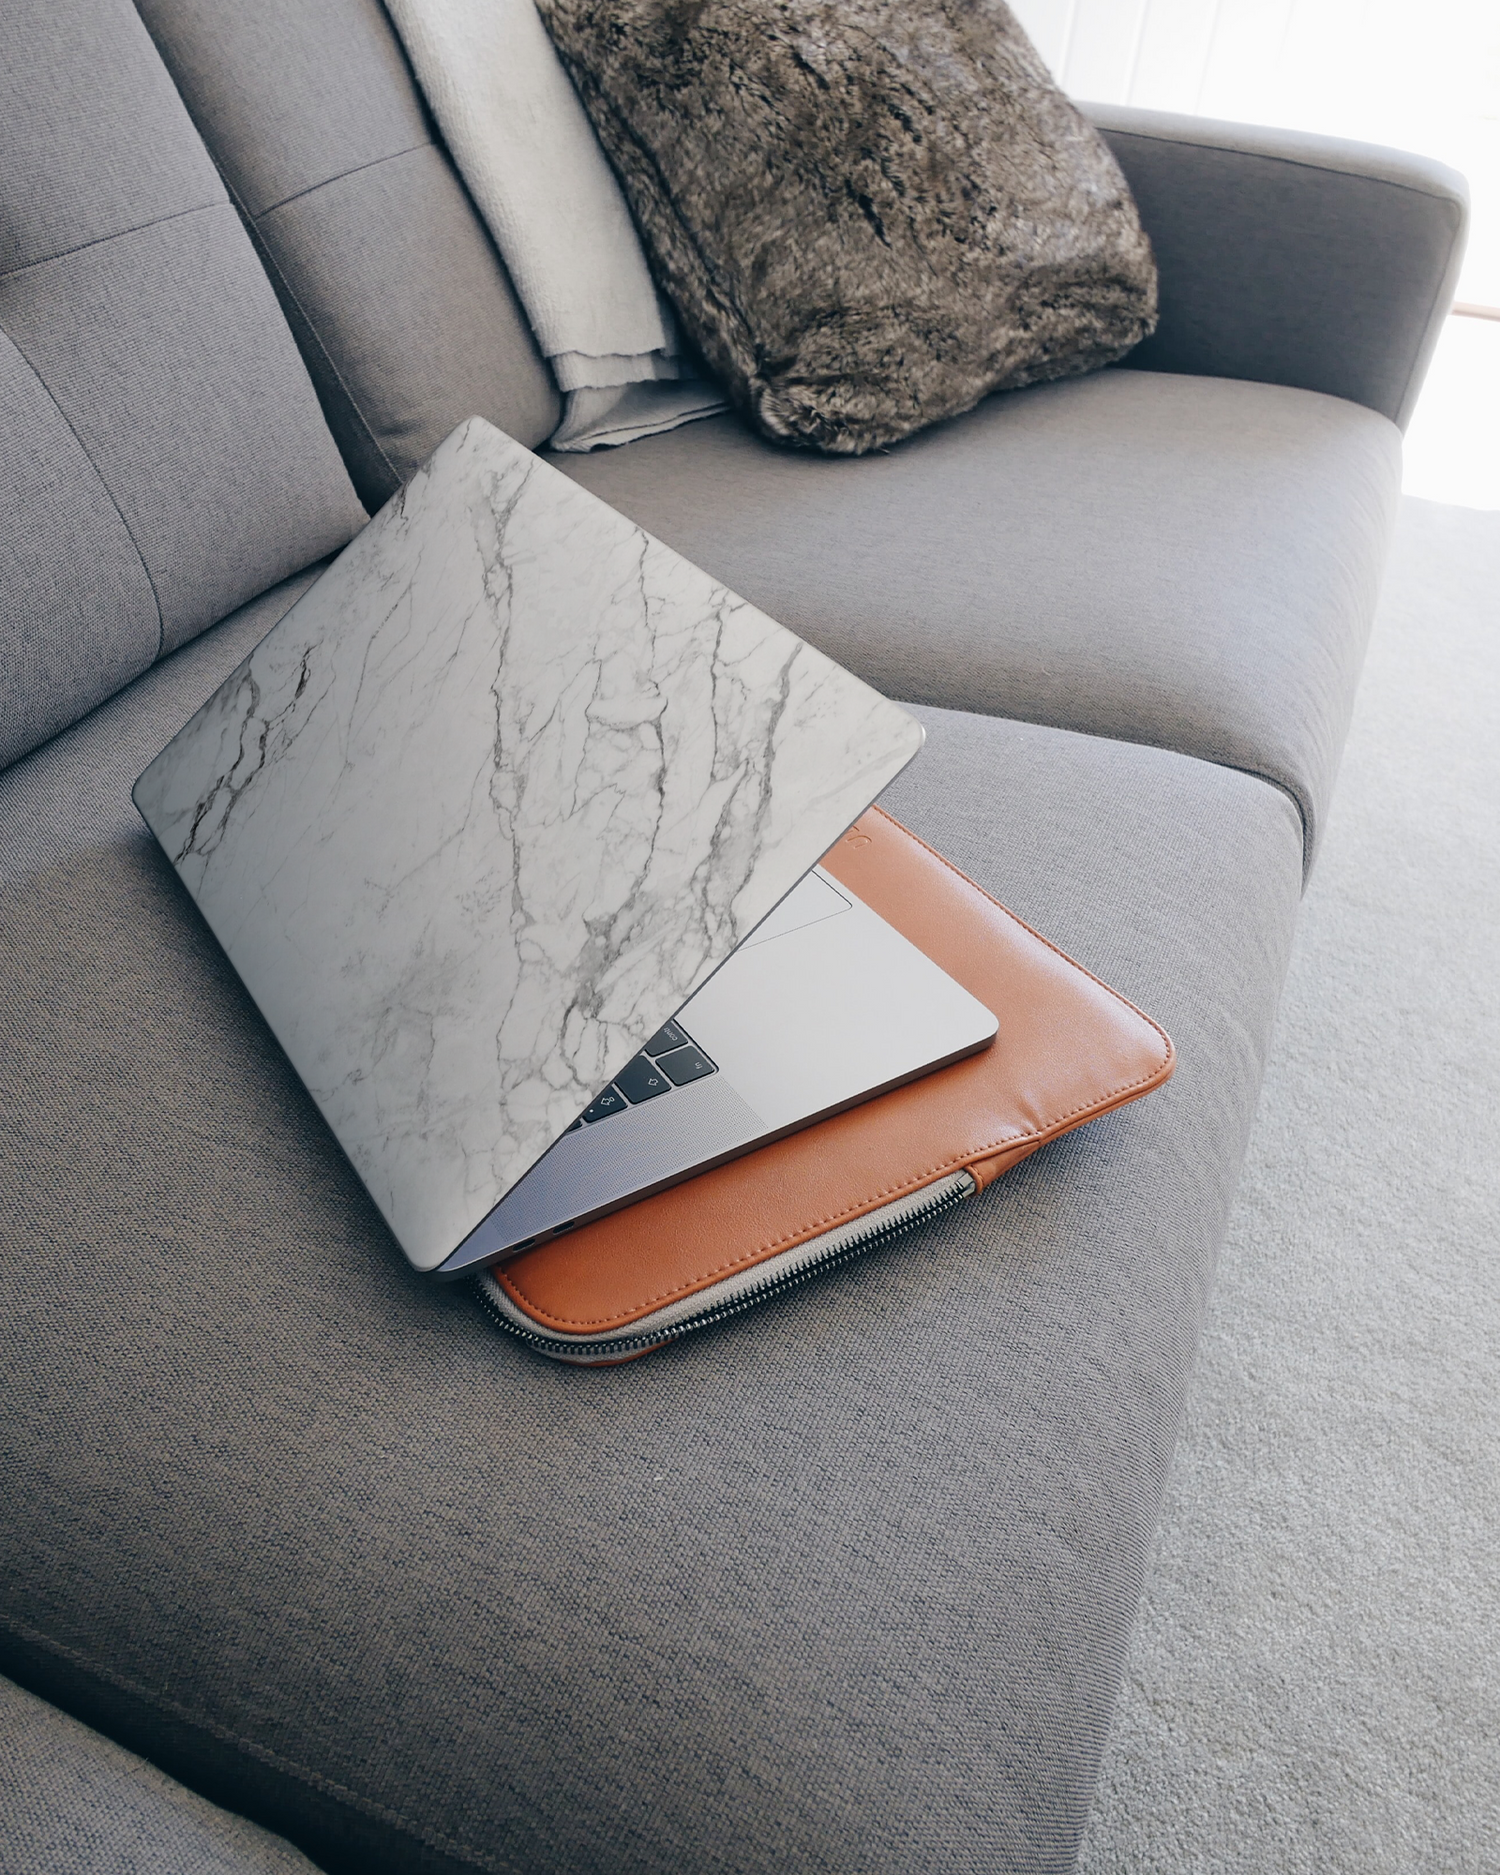 White Marble Laptop Skin for 15 inch Apple MacBooks on a couch